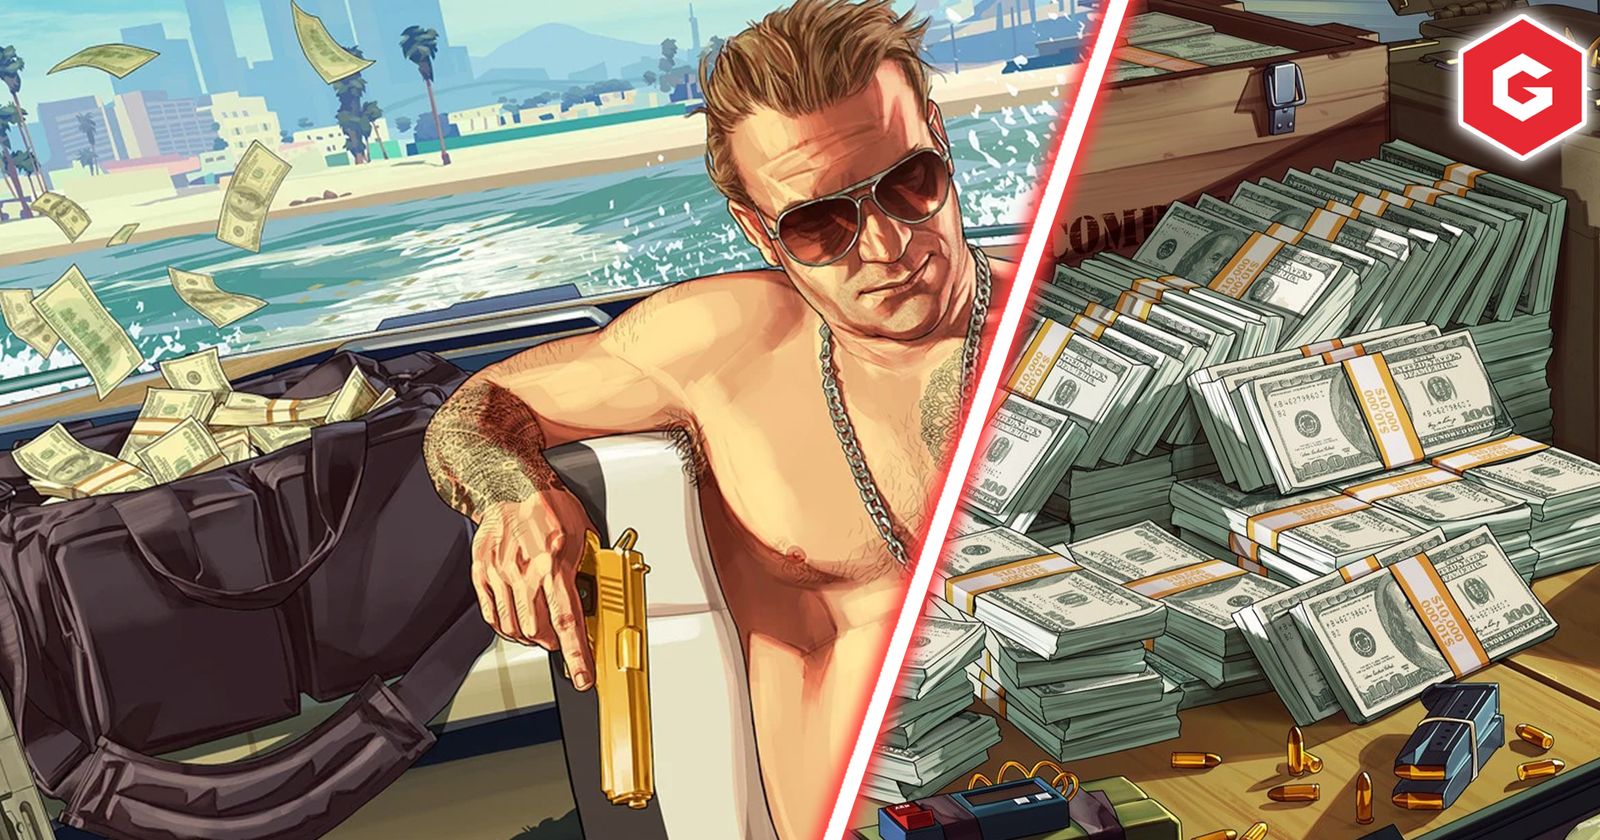 GTA V Tips: How to make money to purchase vehicles, weapons, properties and  more